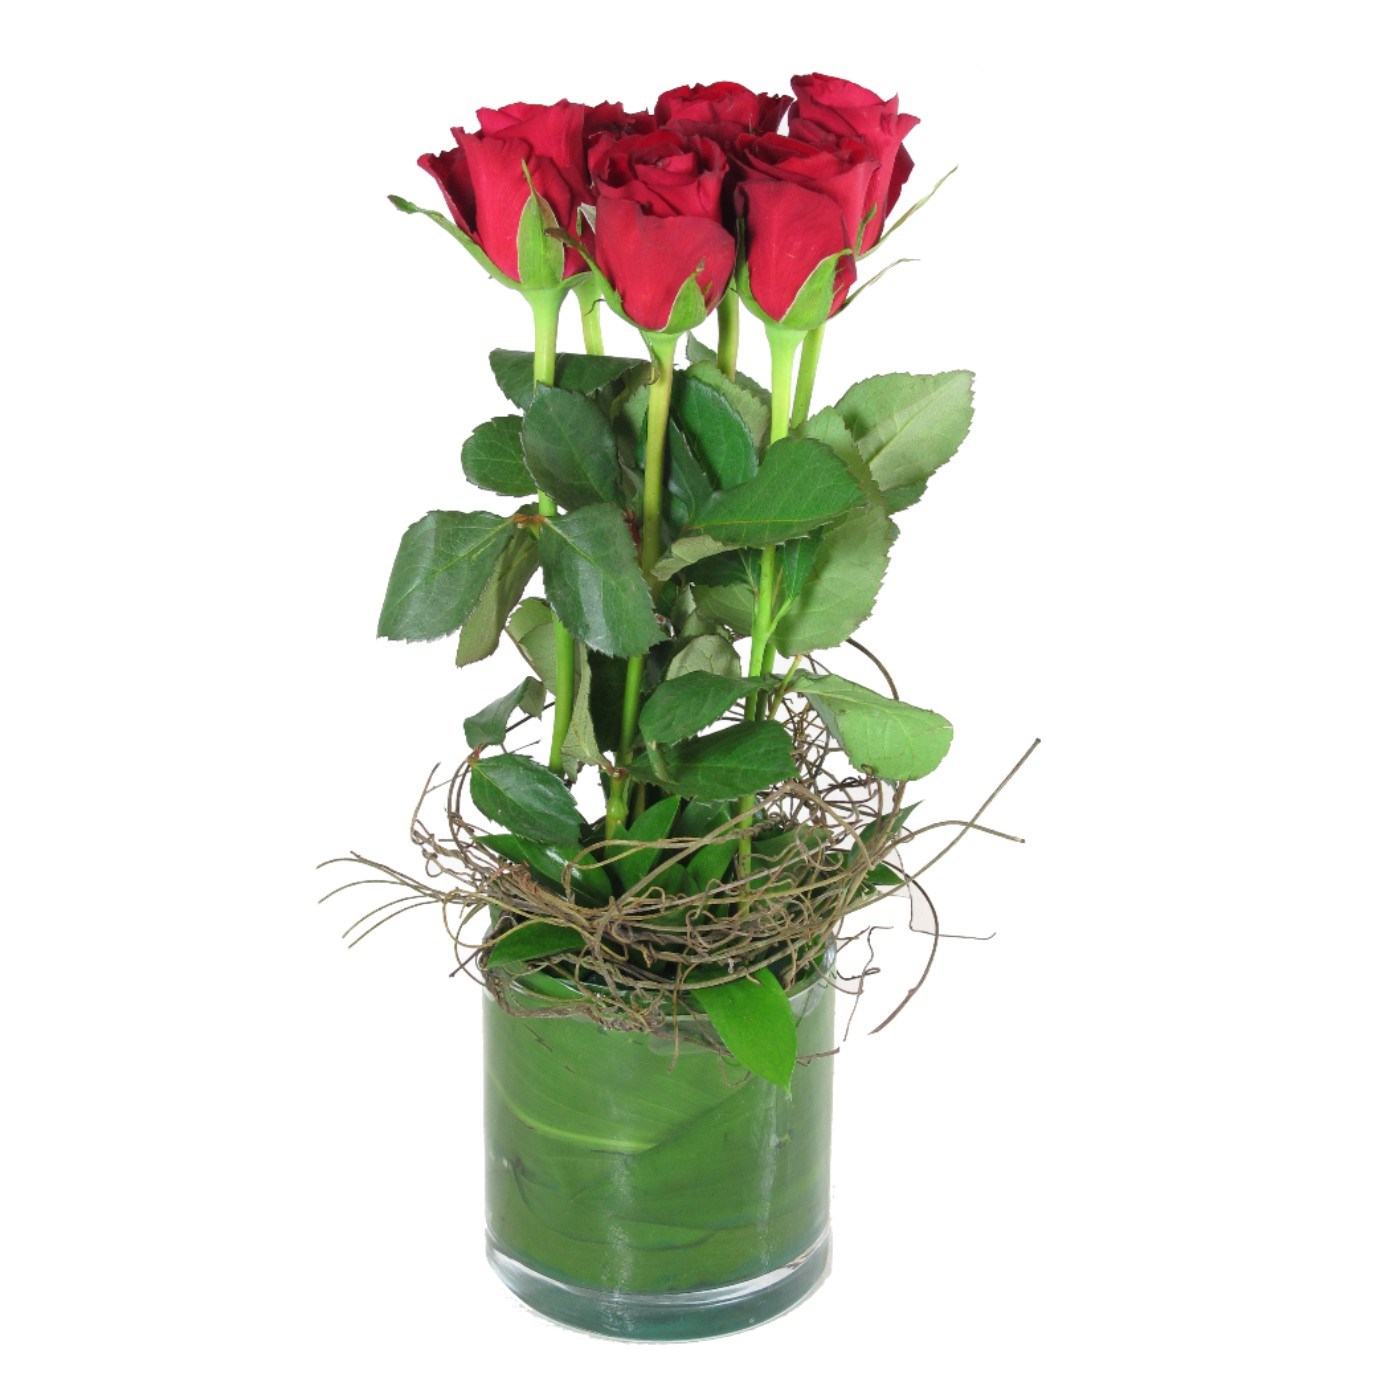 product image for 6 Red Roses in Vase